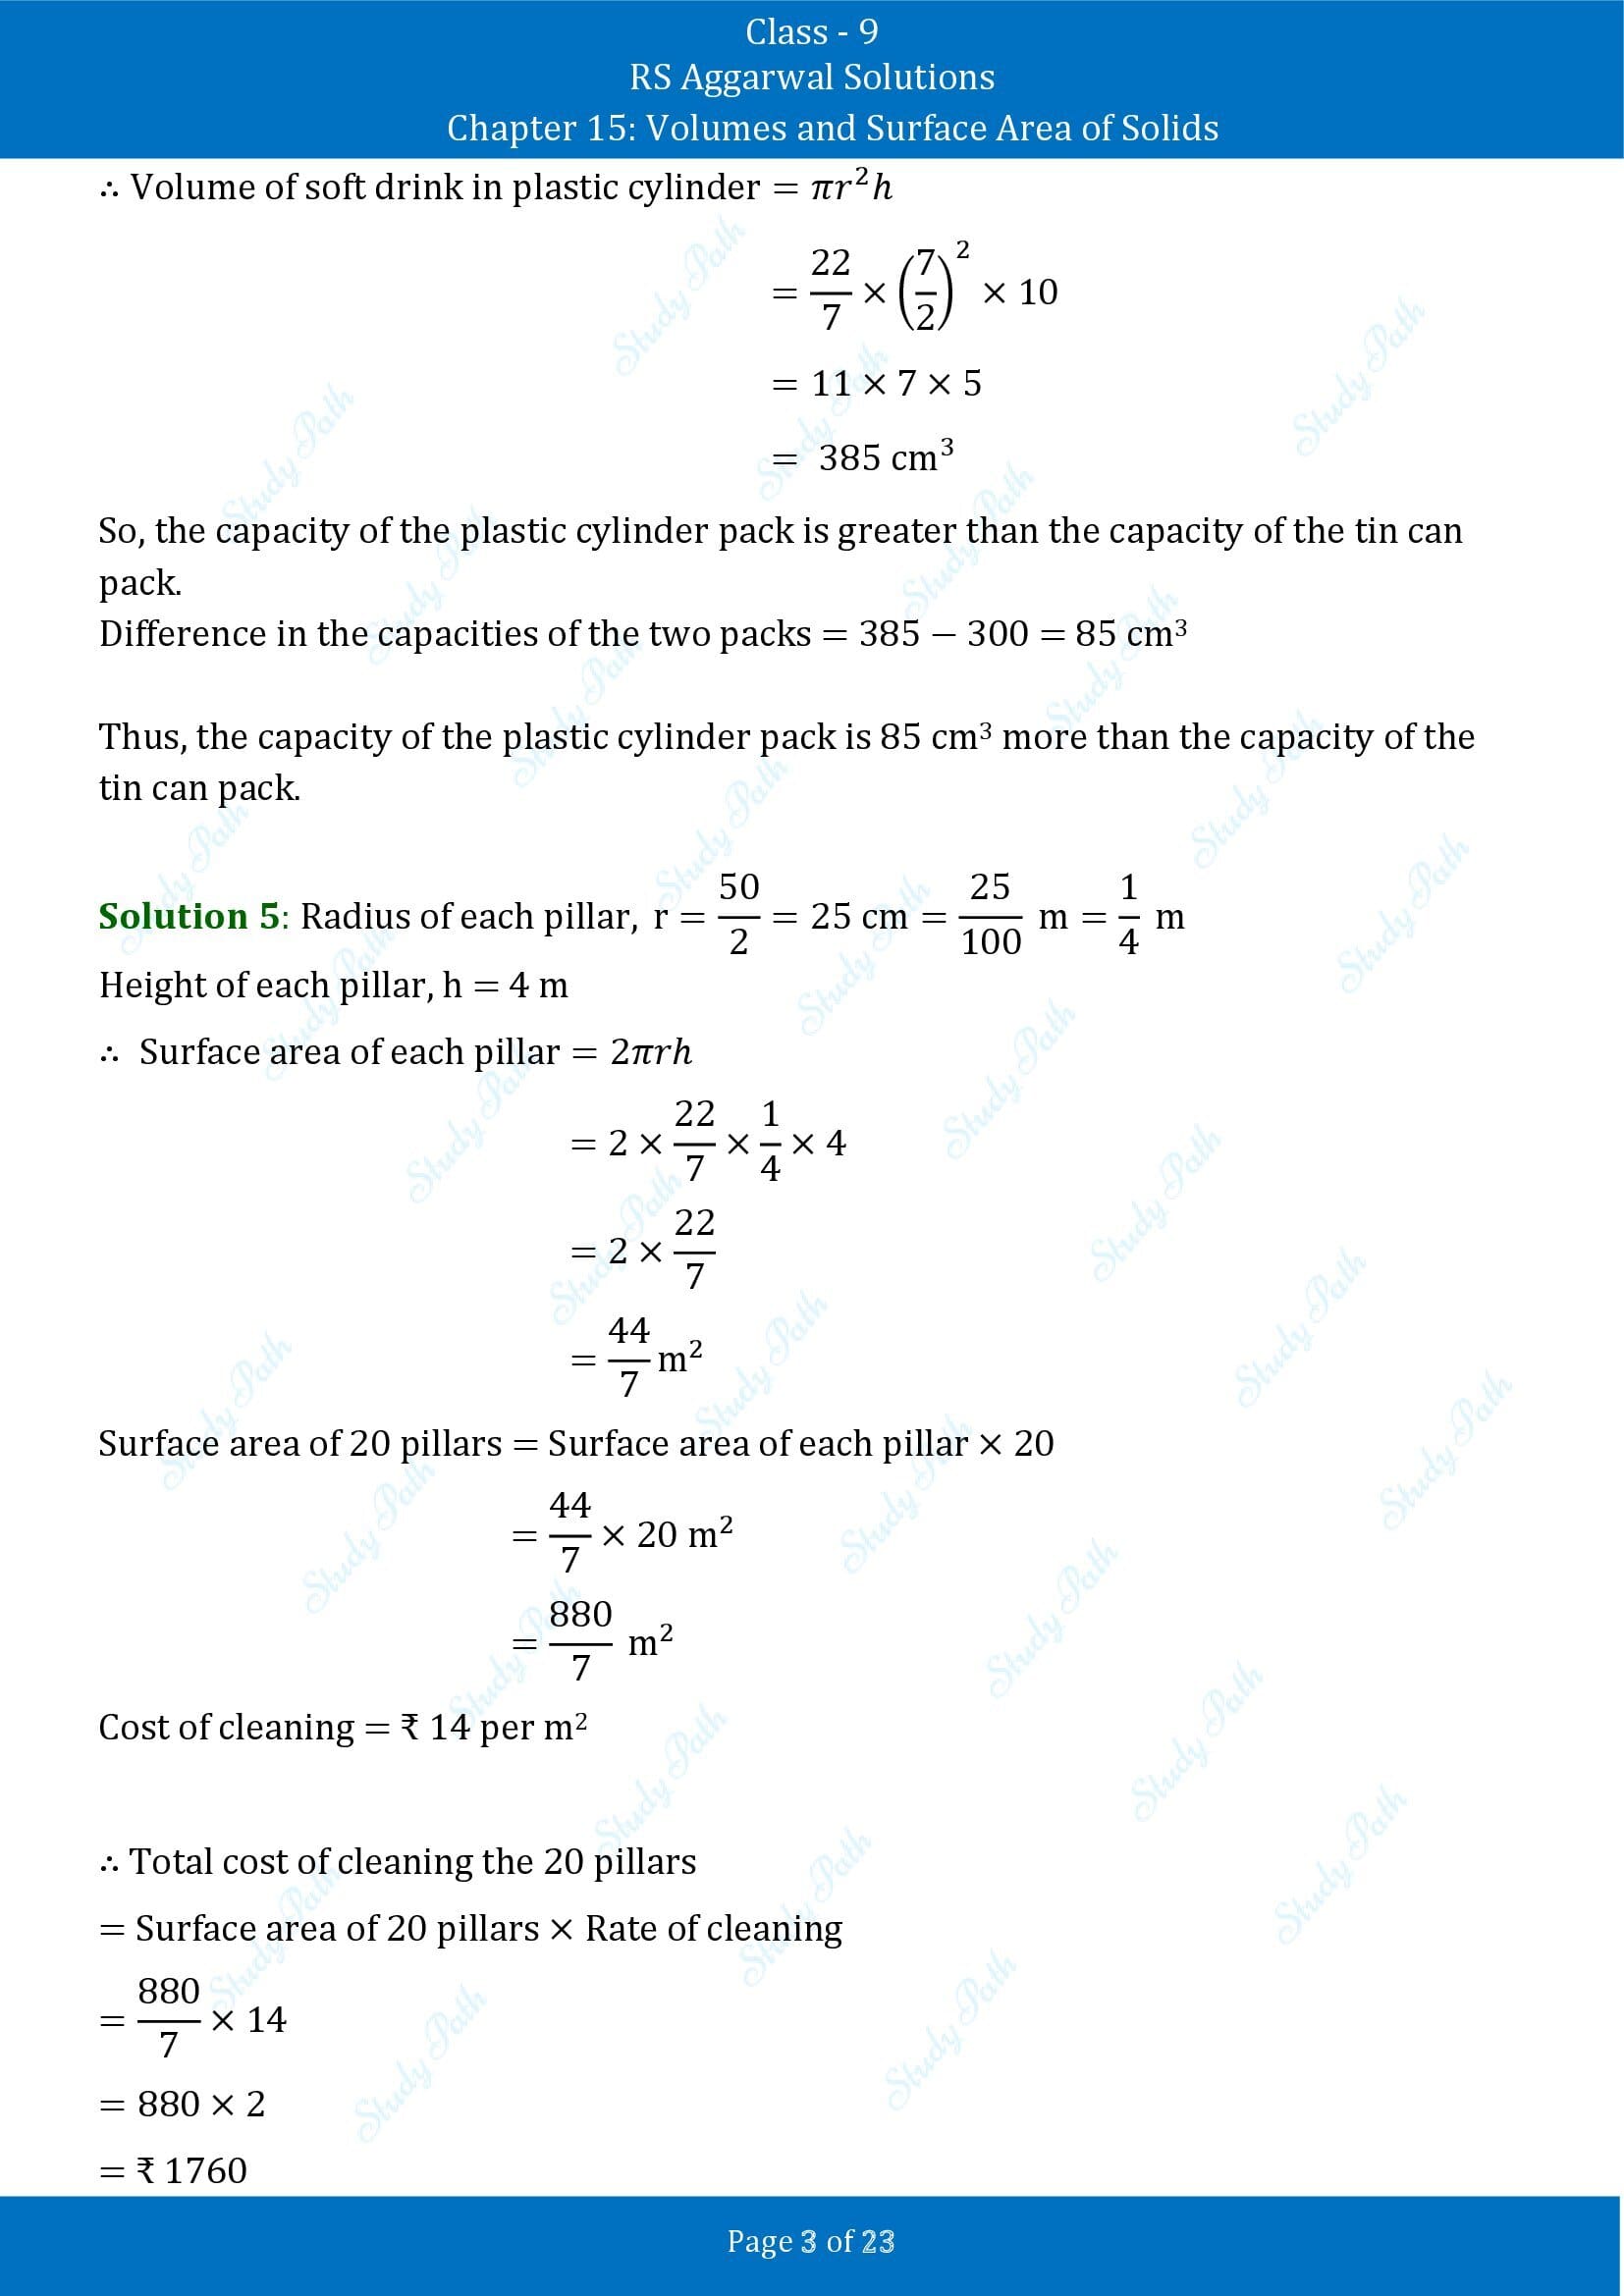 RS Aggarwal Solutions Class 9 Chapter 15 Volumes and Surface Area of Solids Exercise 15B 00003